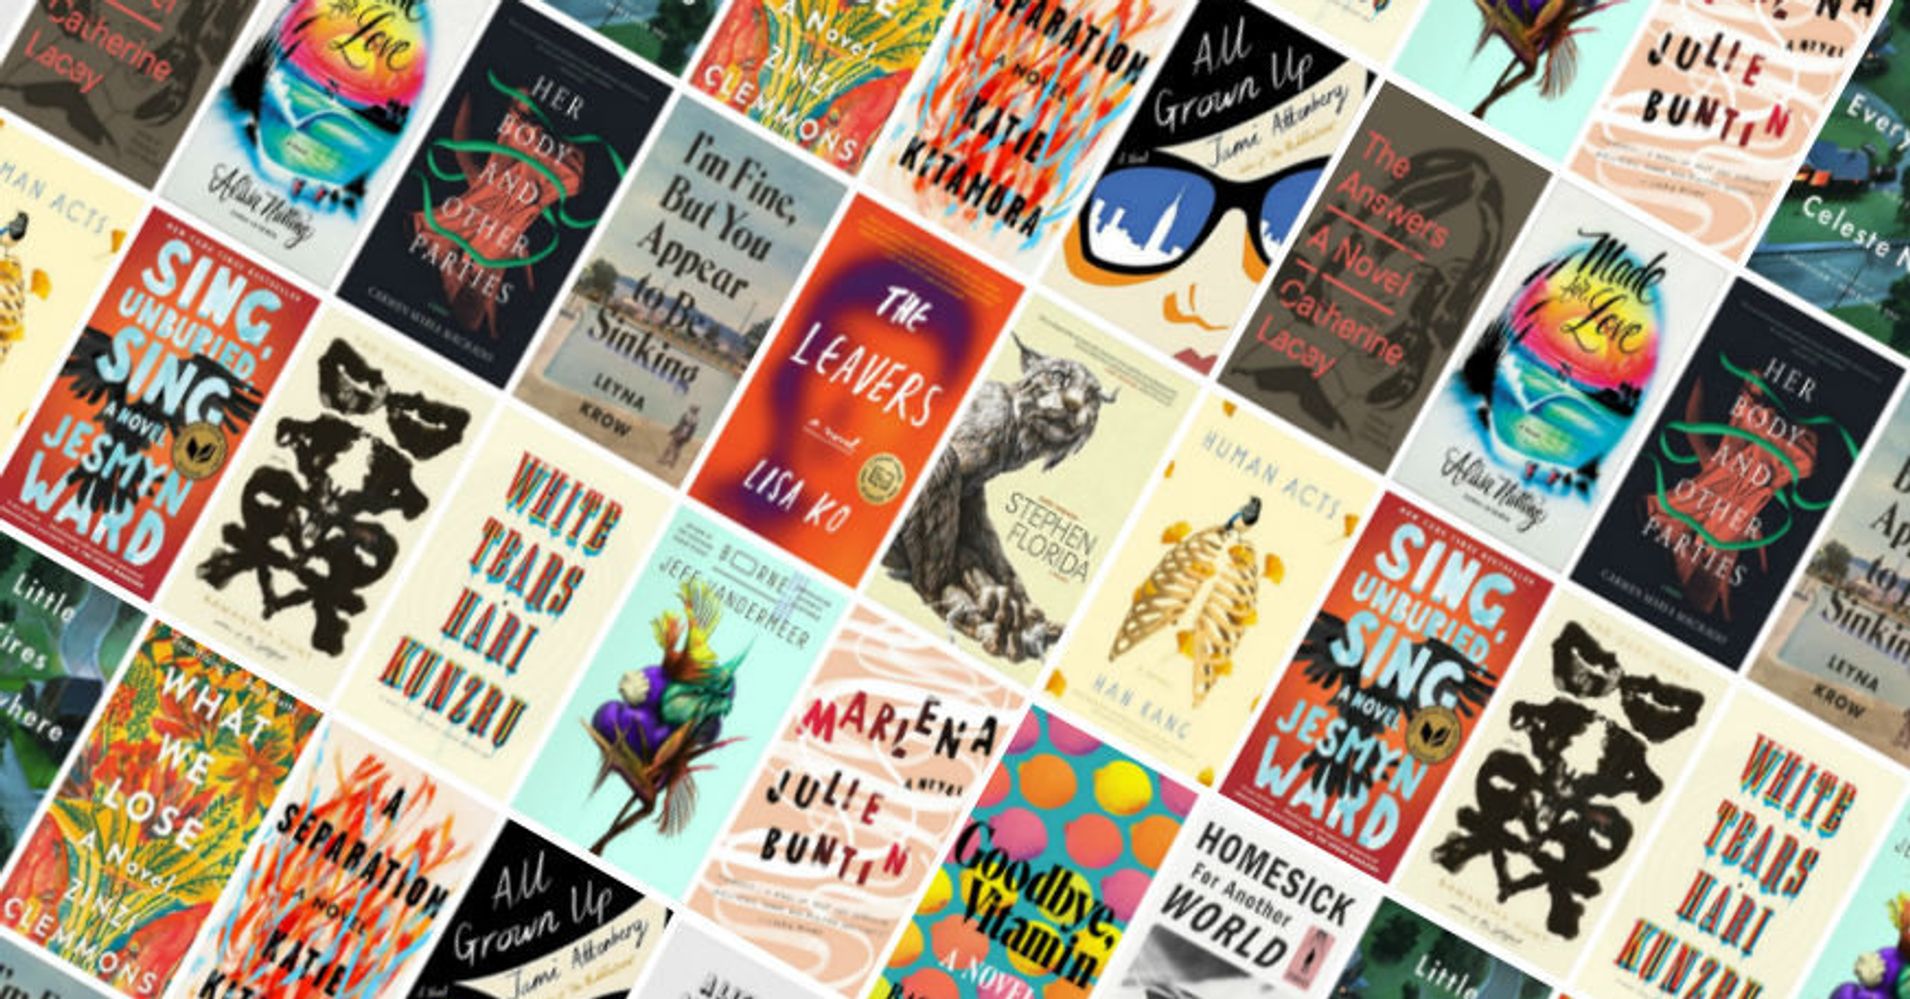 The Best Fiction Books Of 2017 | HuffPost